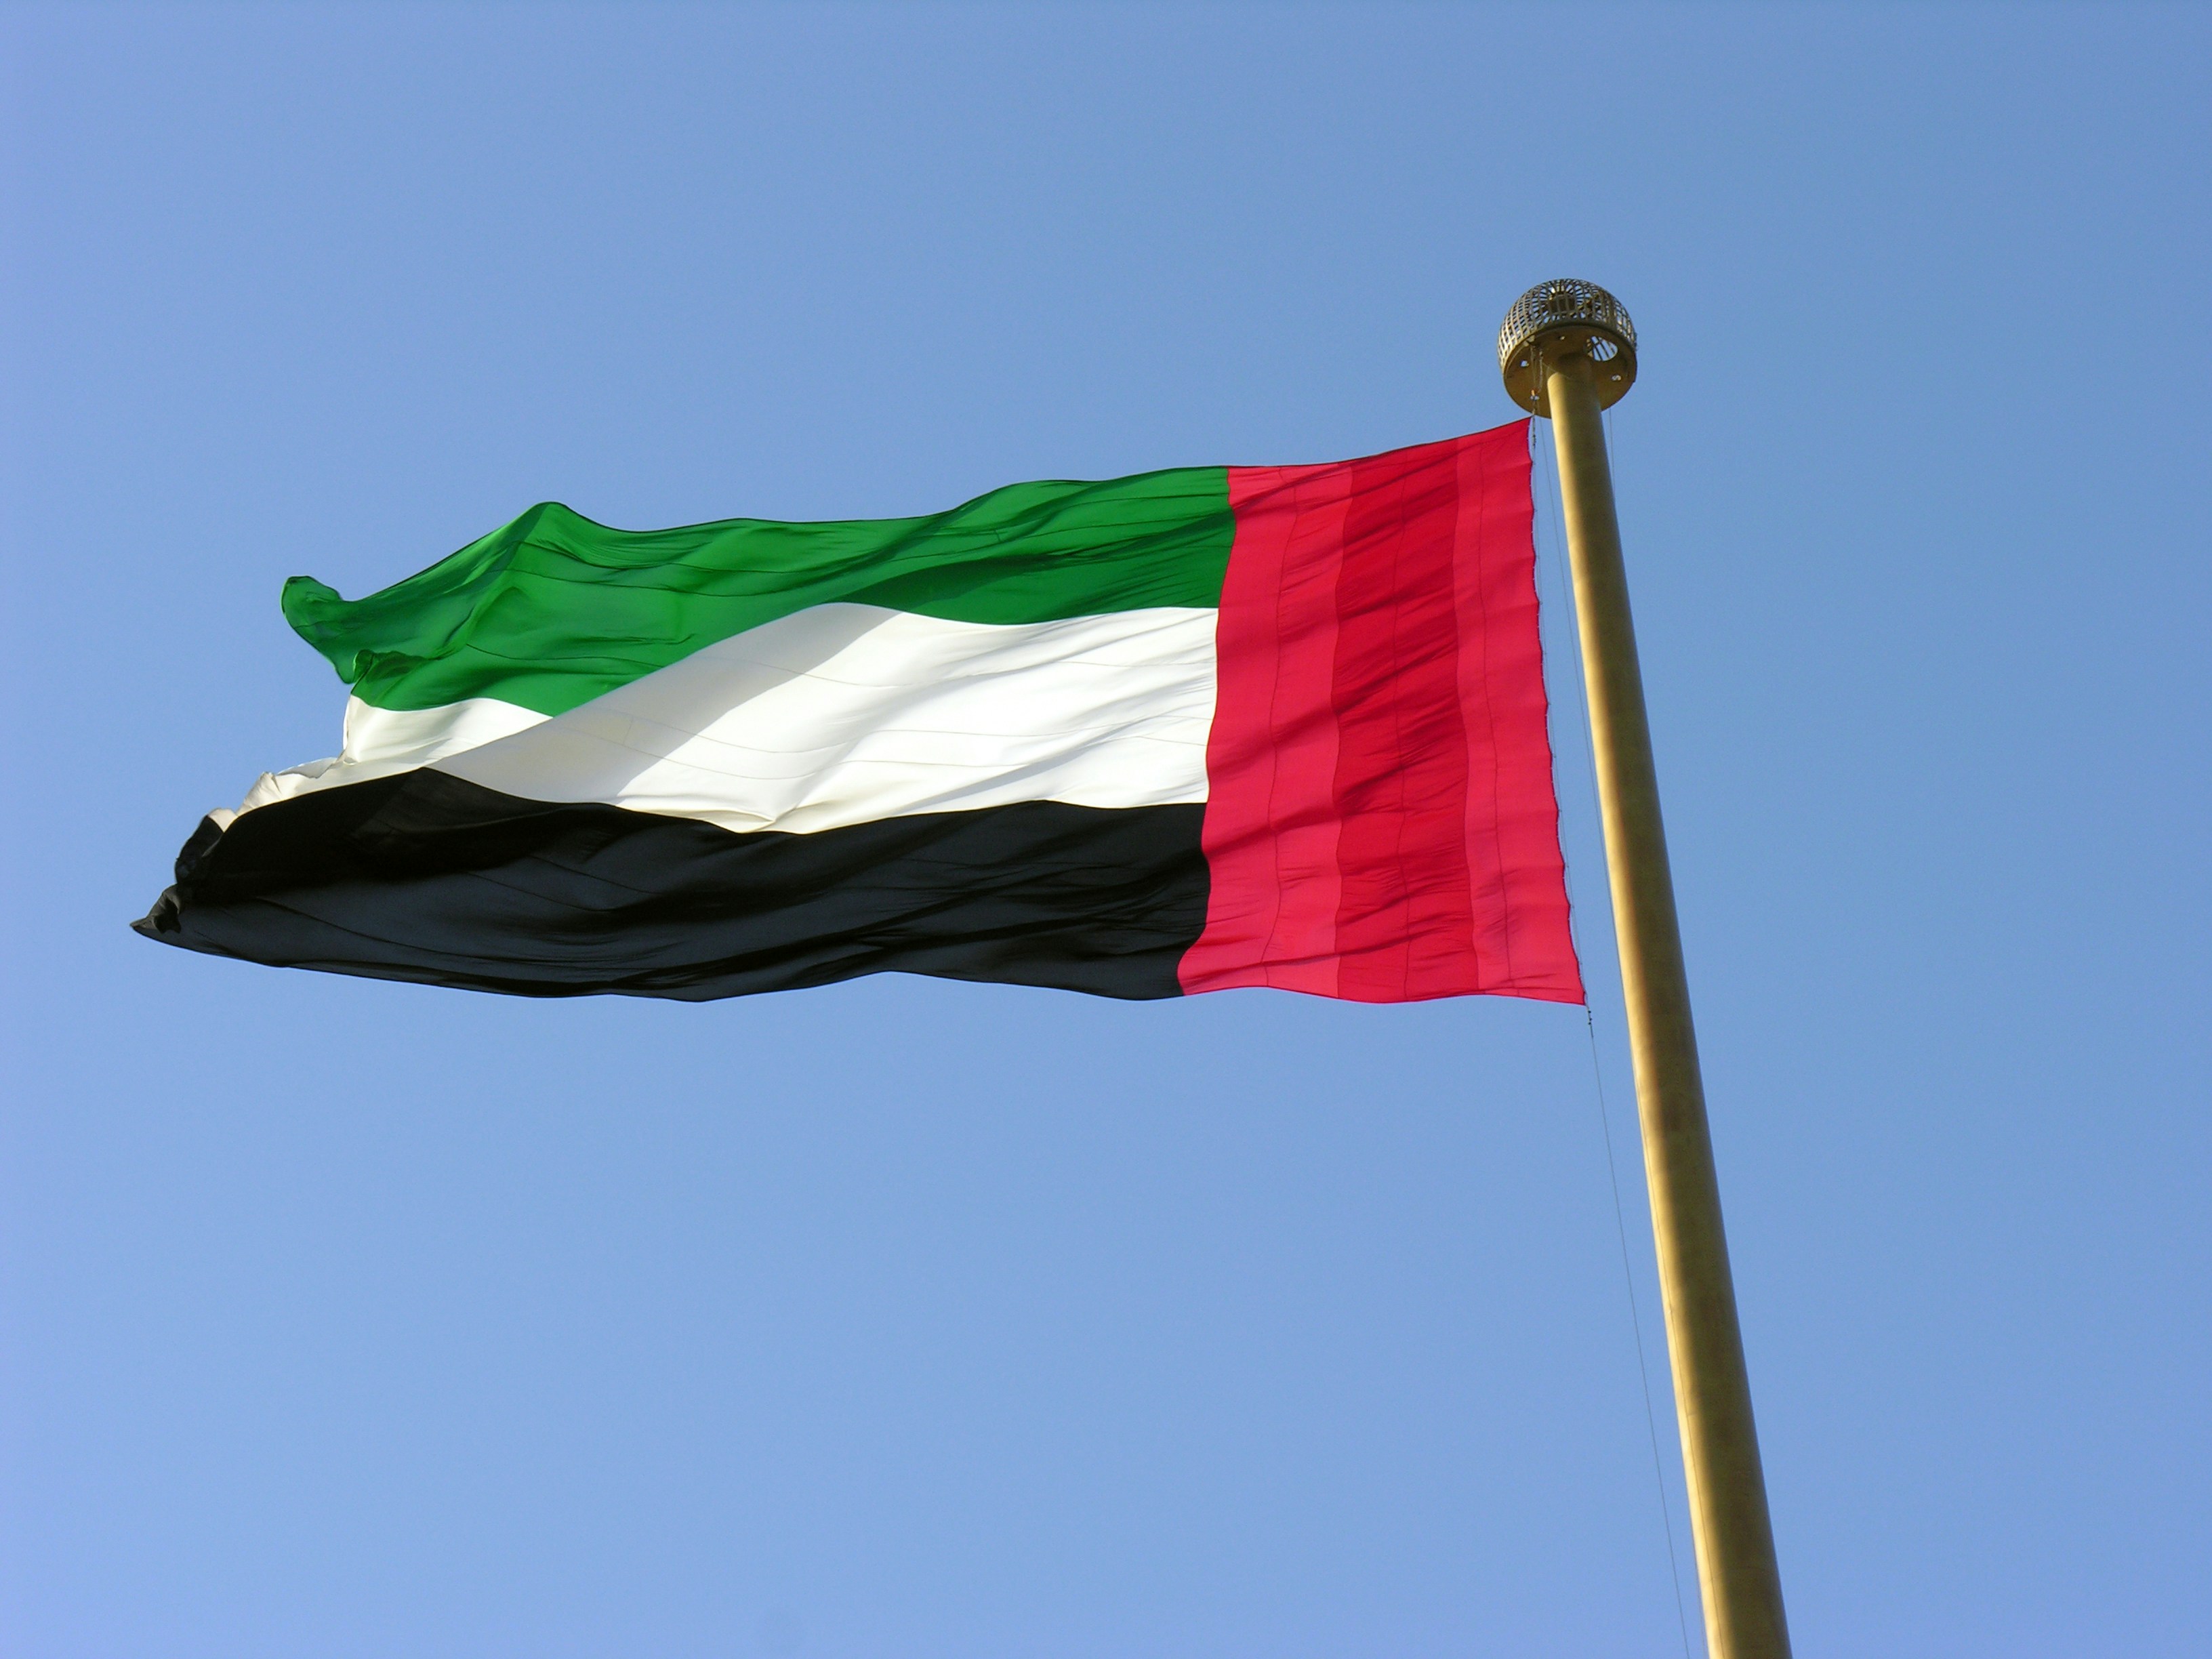 UAE’s economic leadership highlights key role of anti-corruption reform in the Middle East